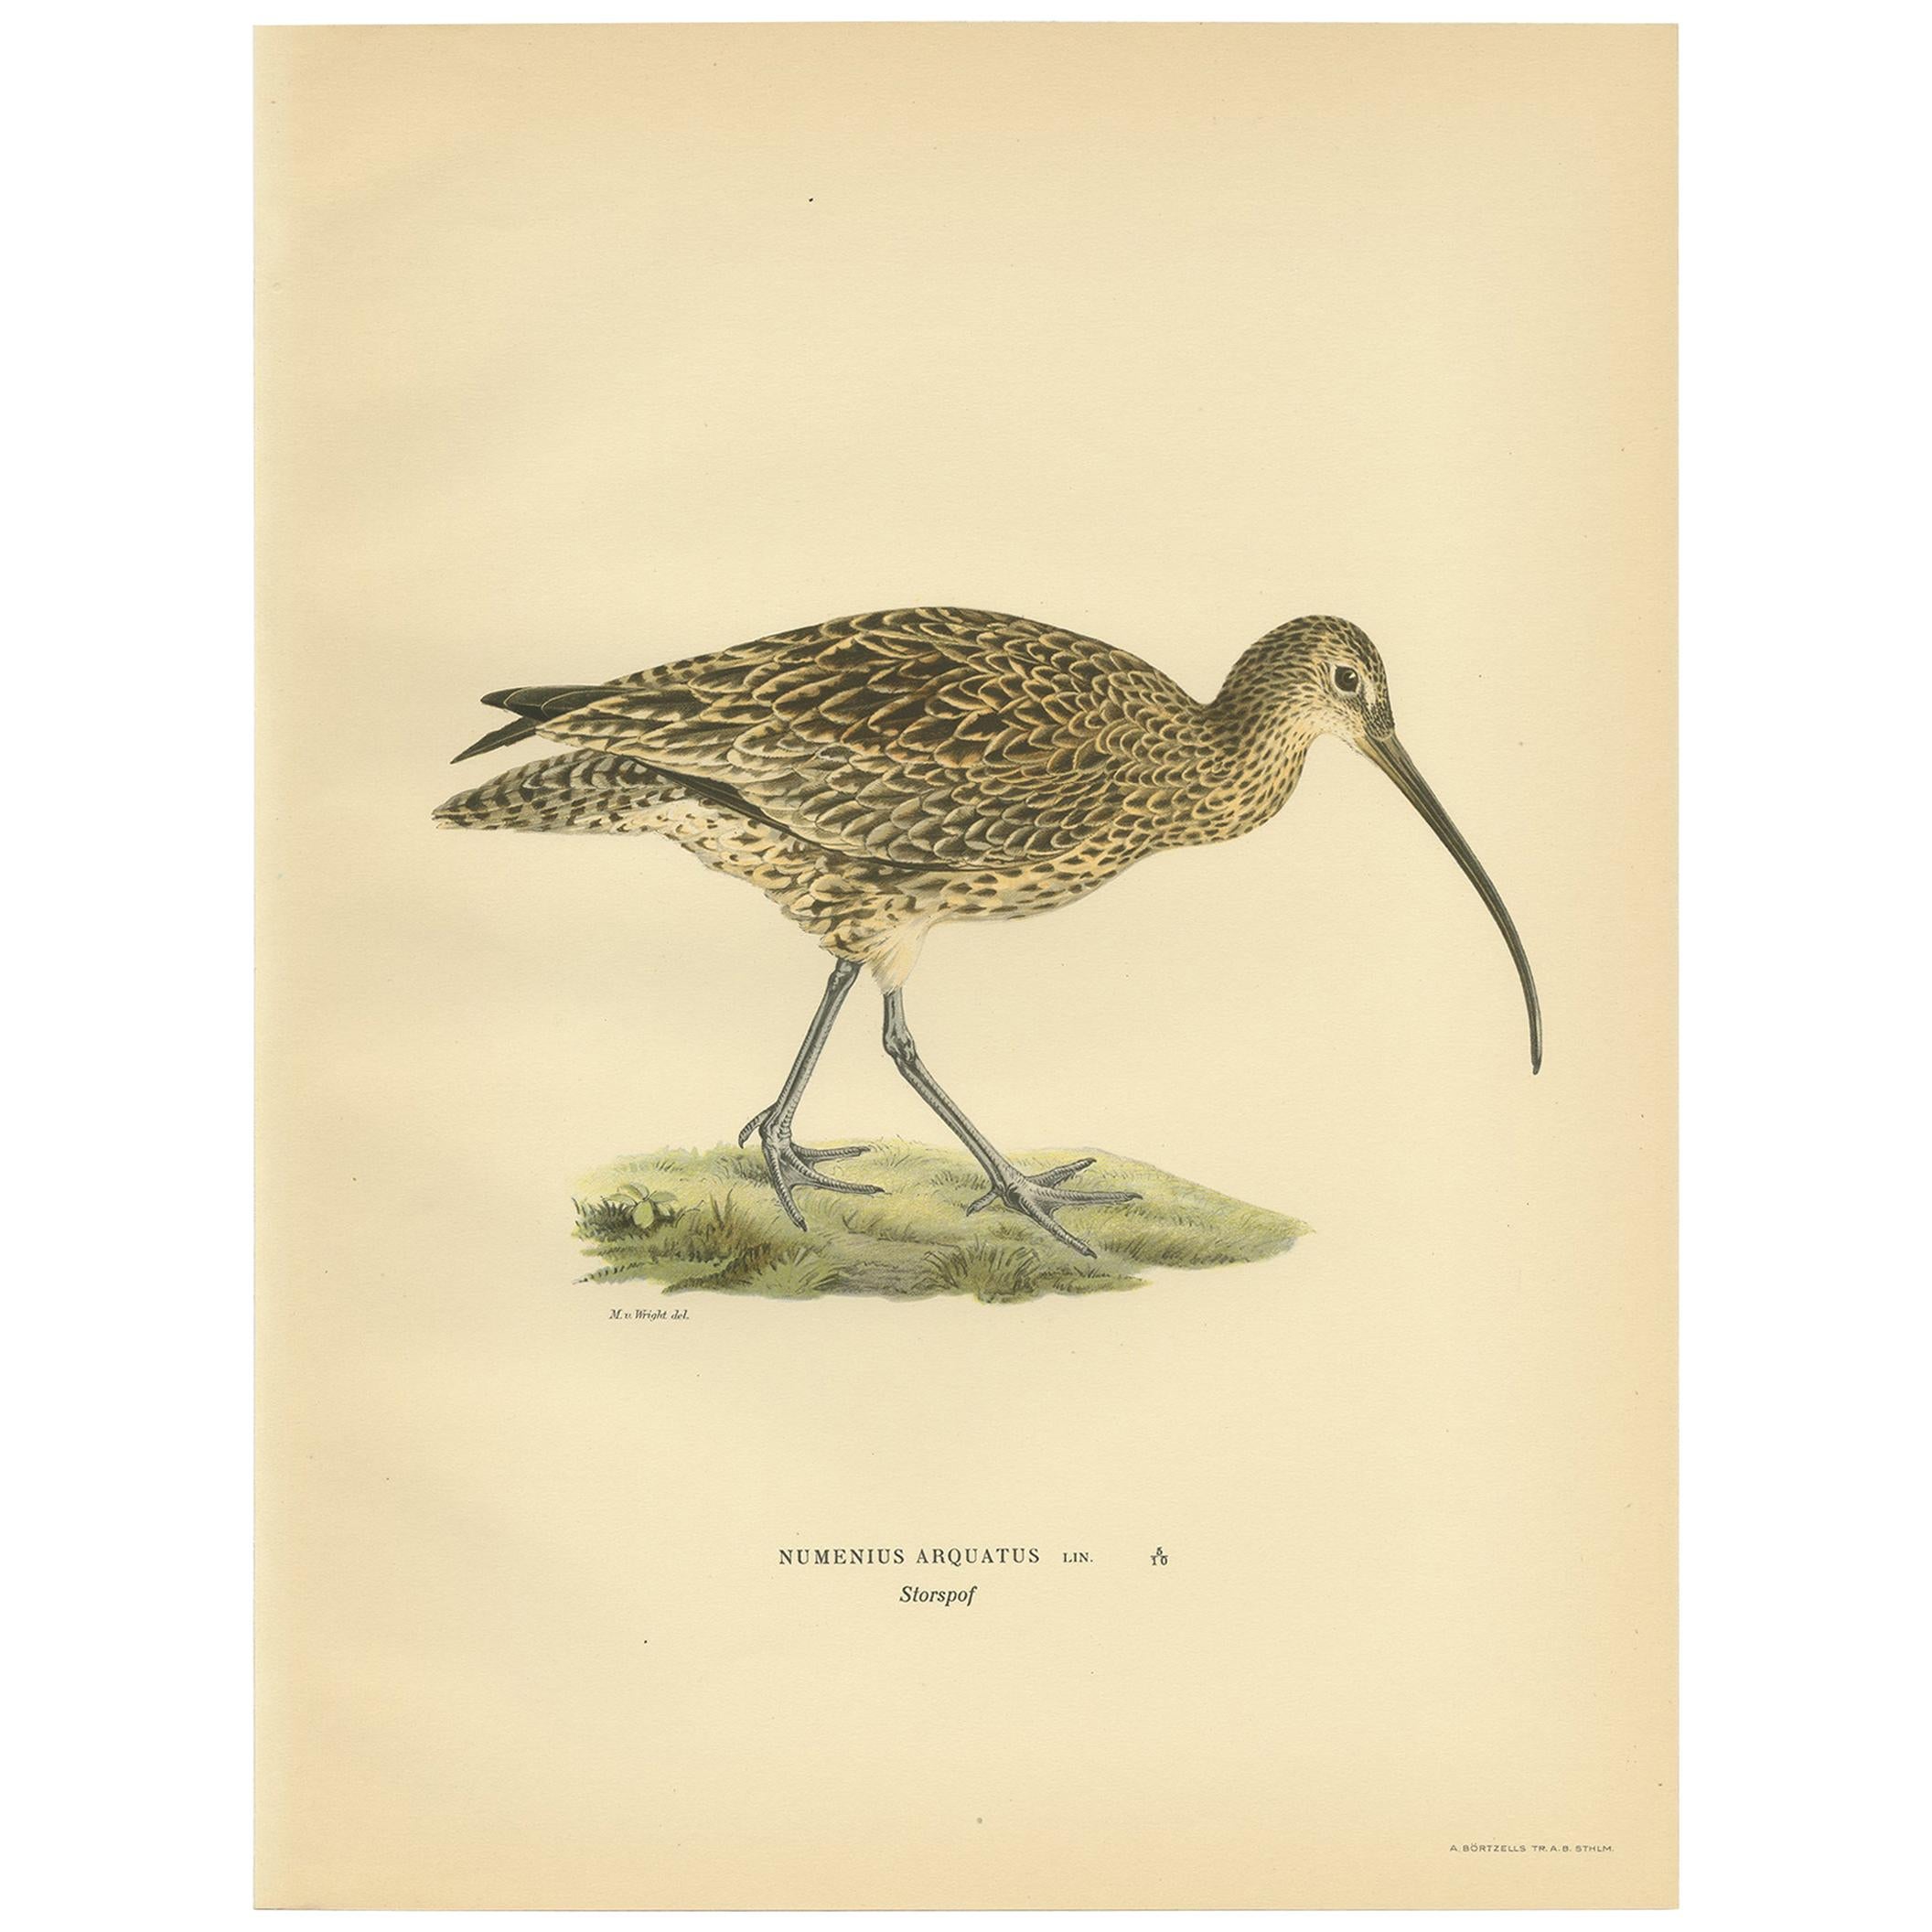 Antique Bird Print of the Common Curlew by Von Wright, 1929